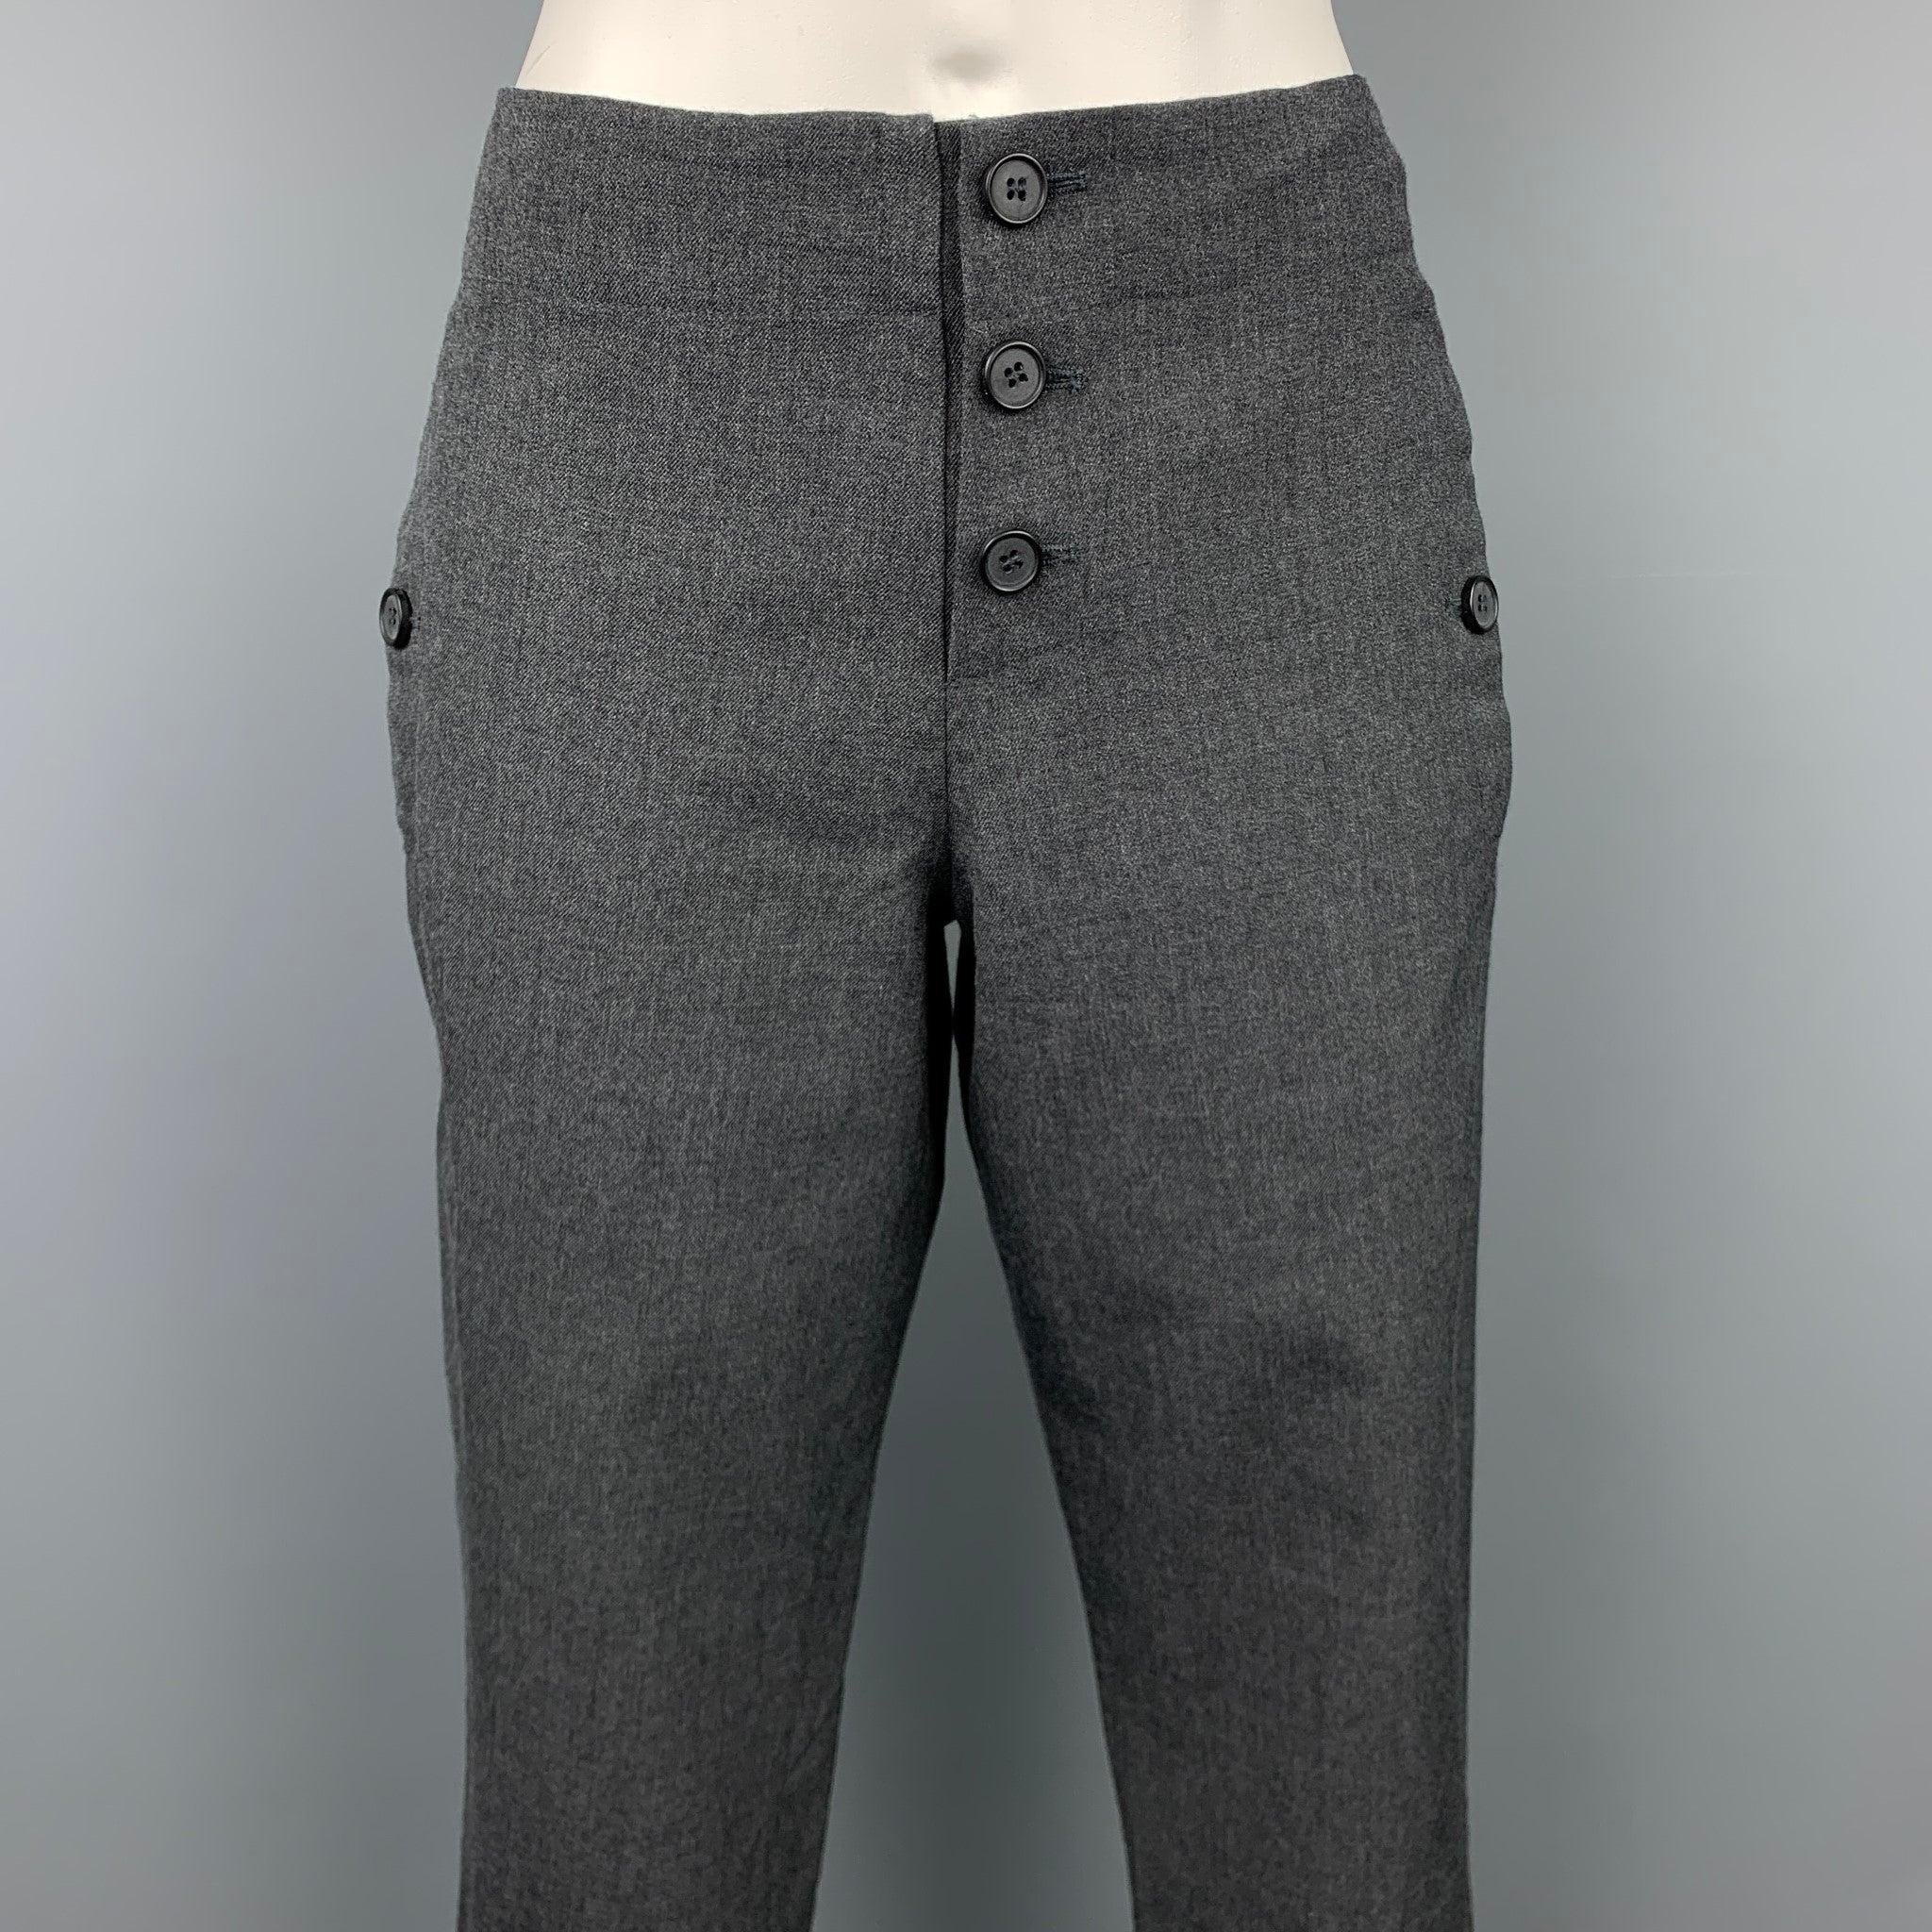 MARNI casual pants comes in a grey virgin wool featuring a cropped style, buttoned pockets, drawstring, and a button fly closure. Made in Portugal.Very Good
Pre-Owned Condition. 

Marked:   38 

Measurements: 
  Waist: 32 inches  Rise: 8 inches 